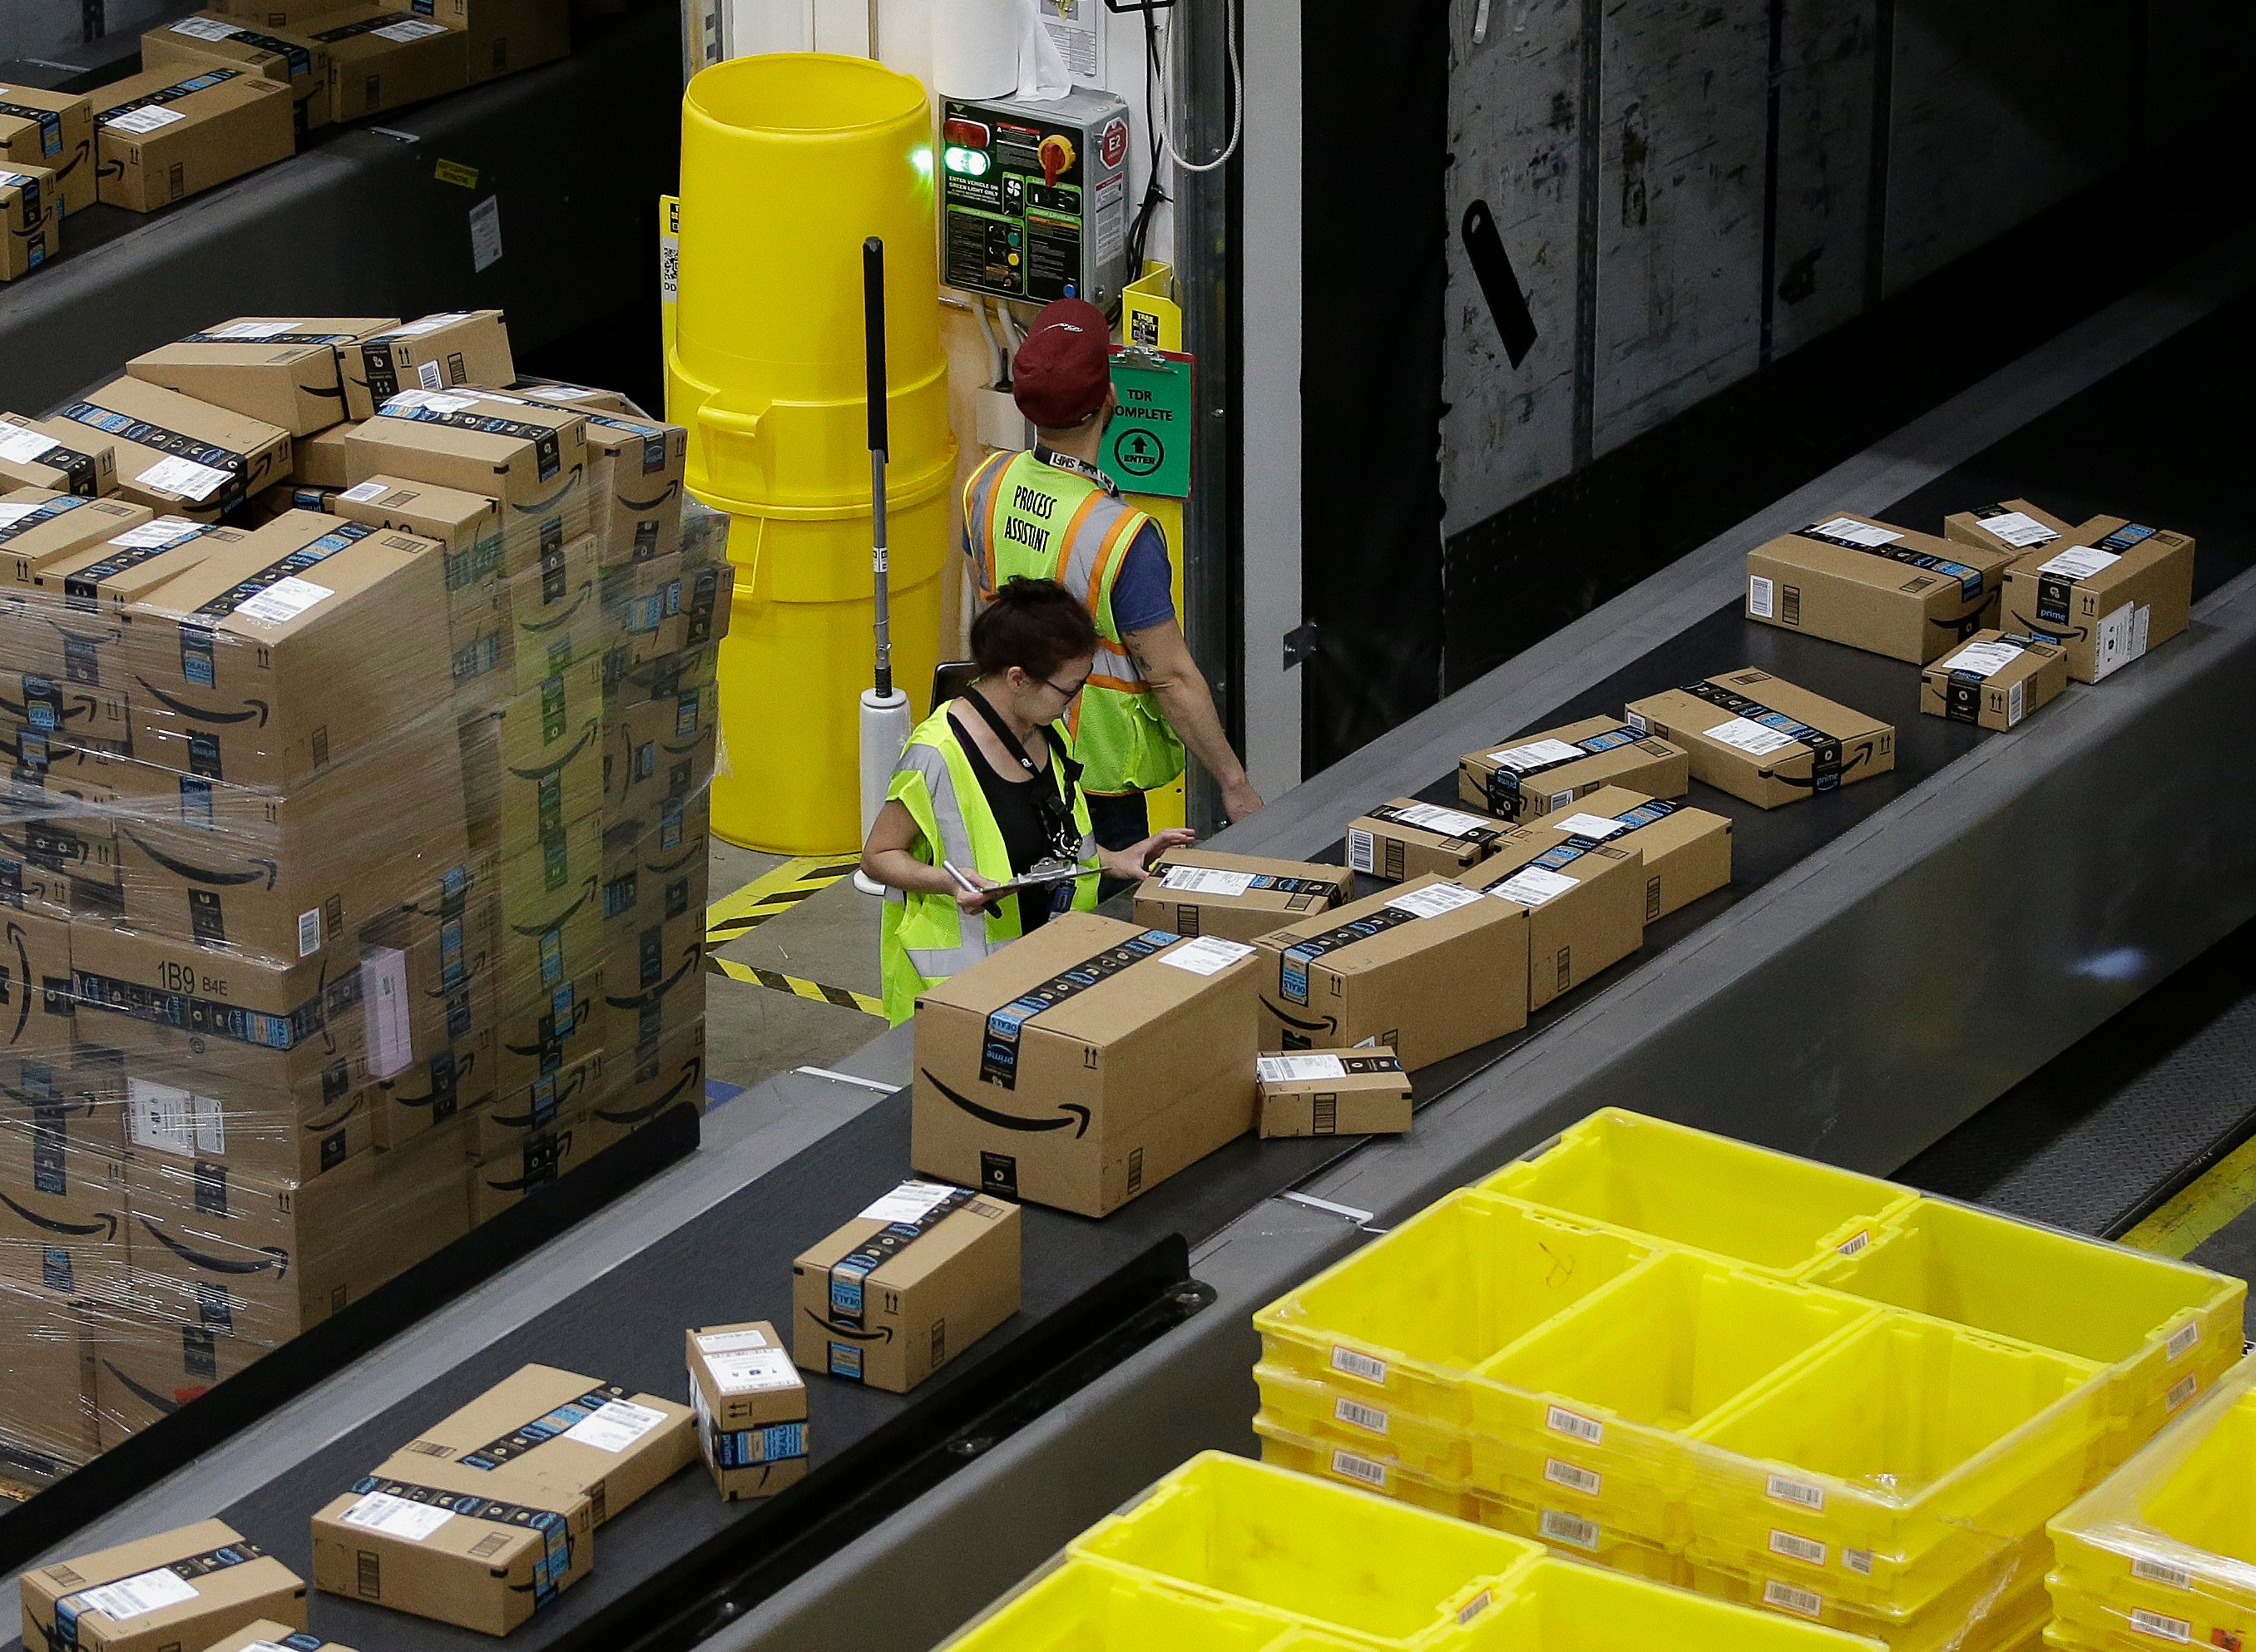 Packages move down a conveyor system where they are directed to the proper shipping area at an Amazon Fulfillment Center in Sacramento, California, on February 9, 2018. Photo: AP